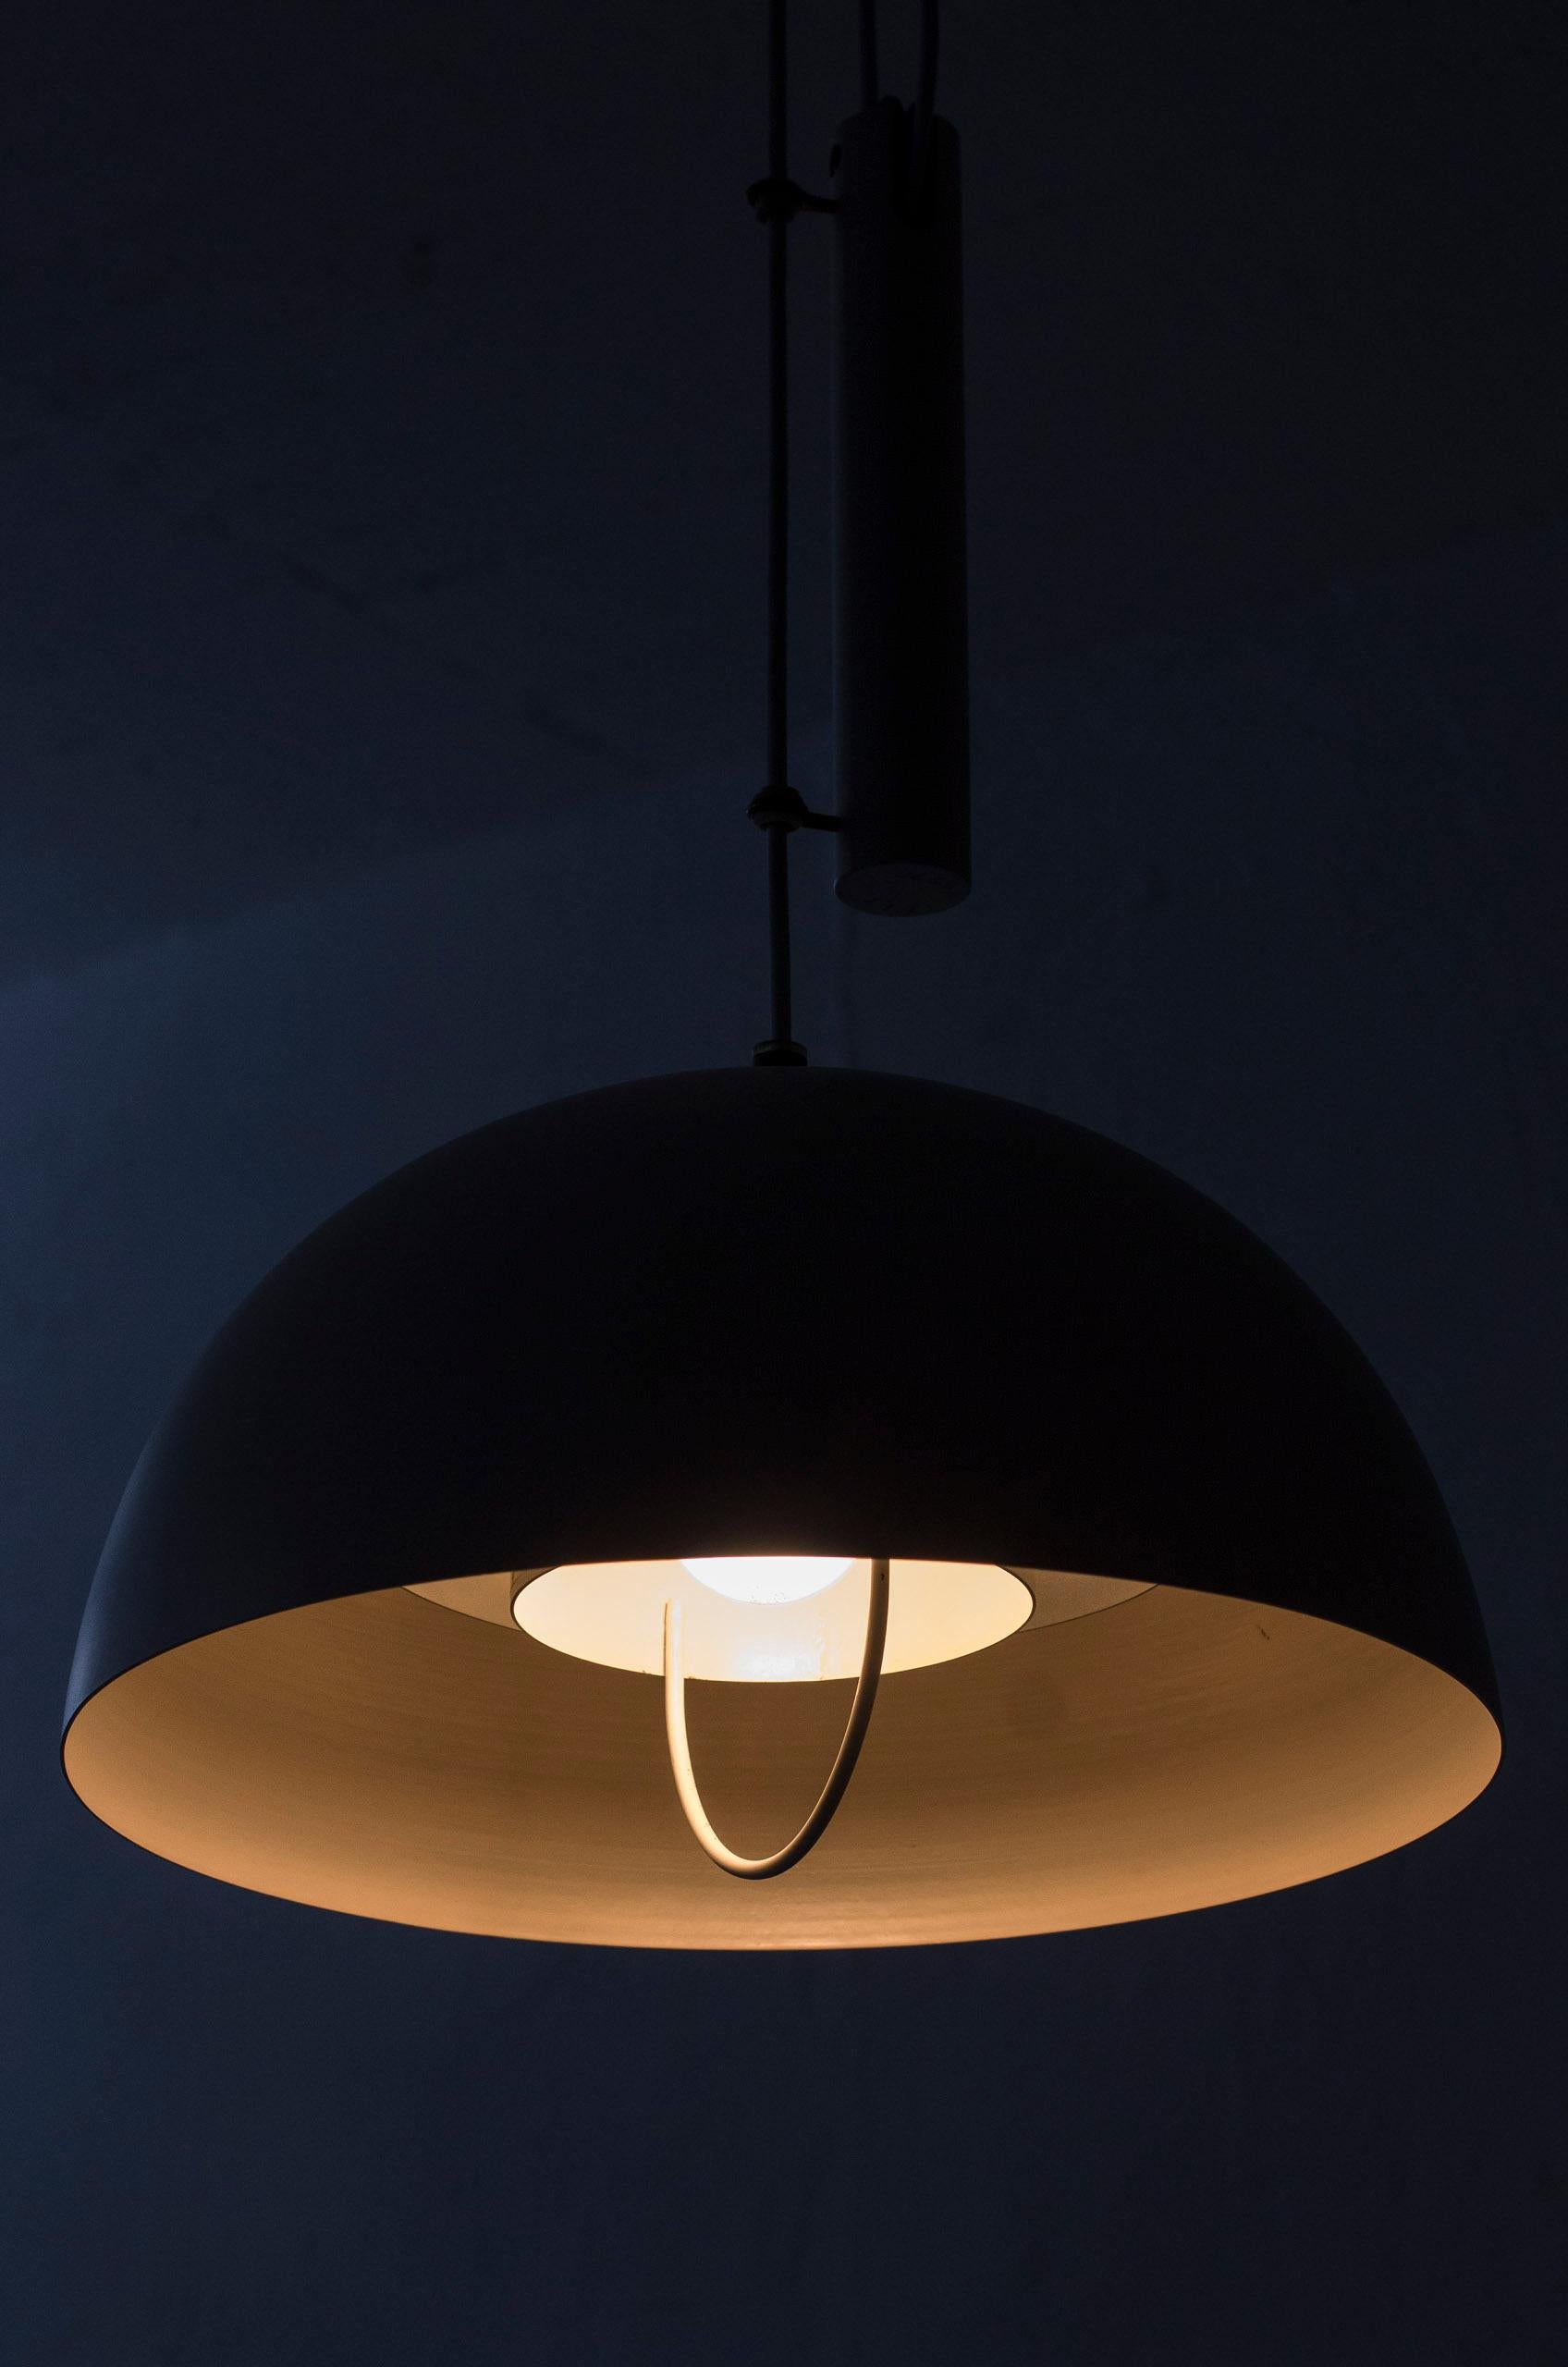 Pendant Lamps Attributed to Hans-Agne Jakobsson, Karlskron Lampfabrik, 1950s For Sale 3